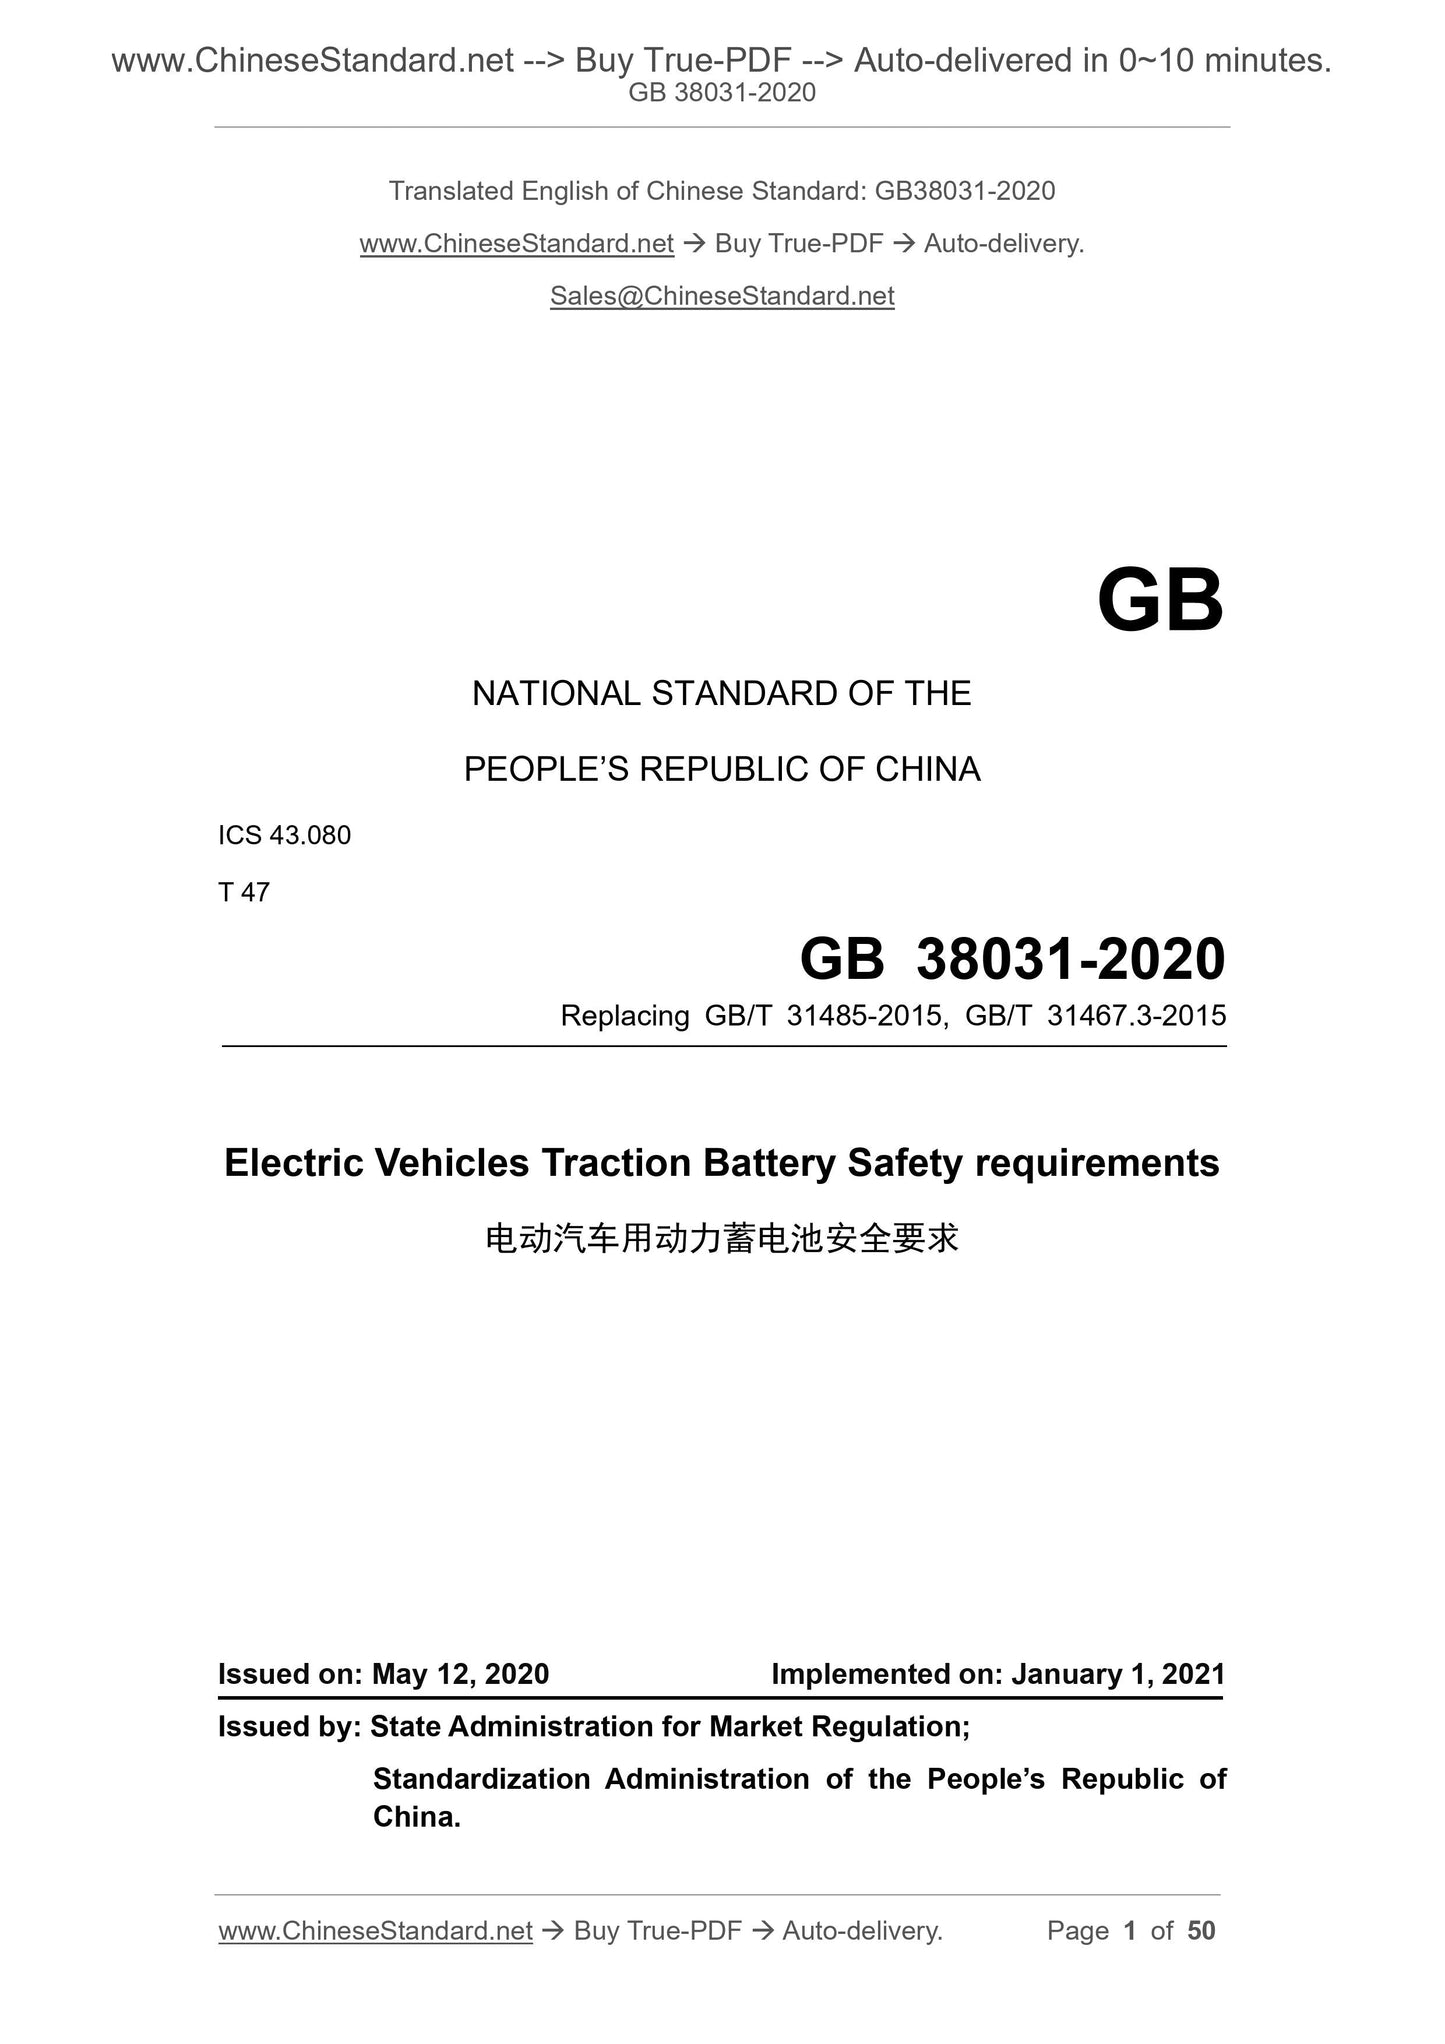 GB 38031-2020 Page 1